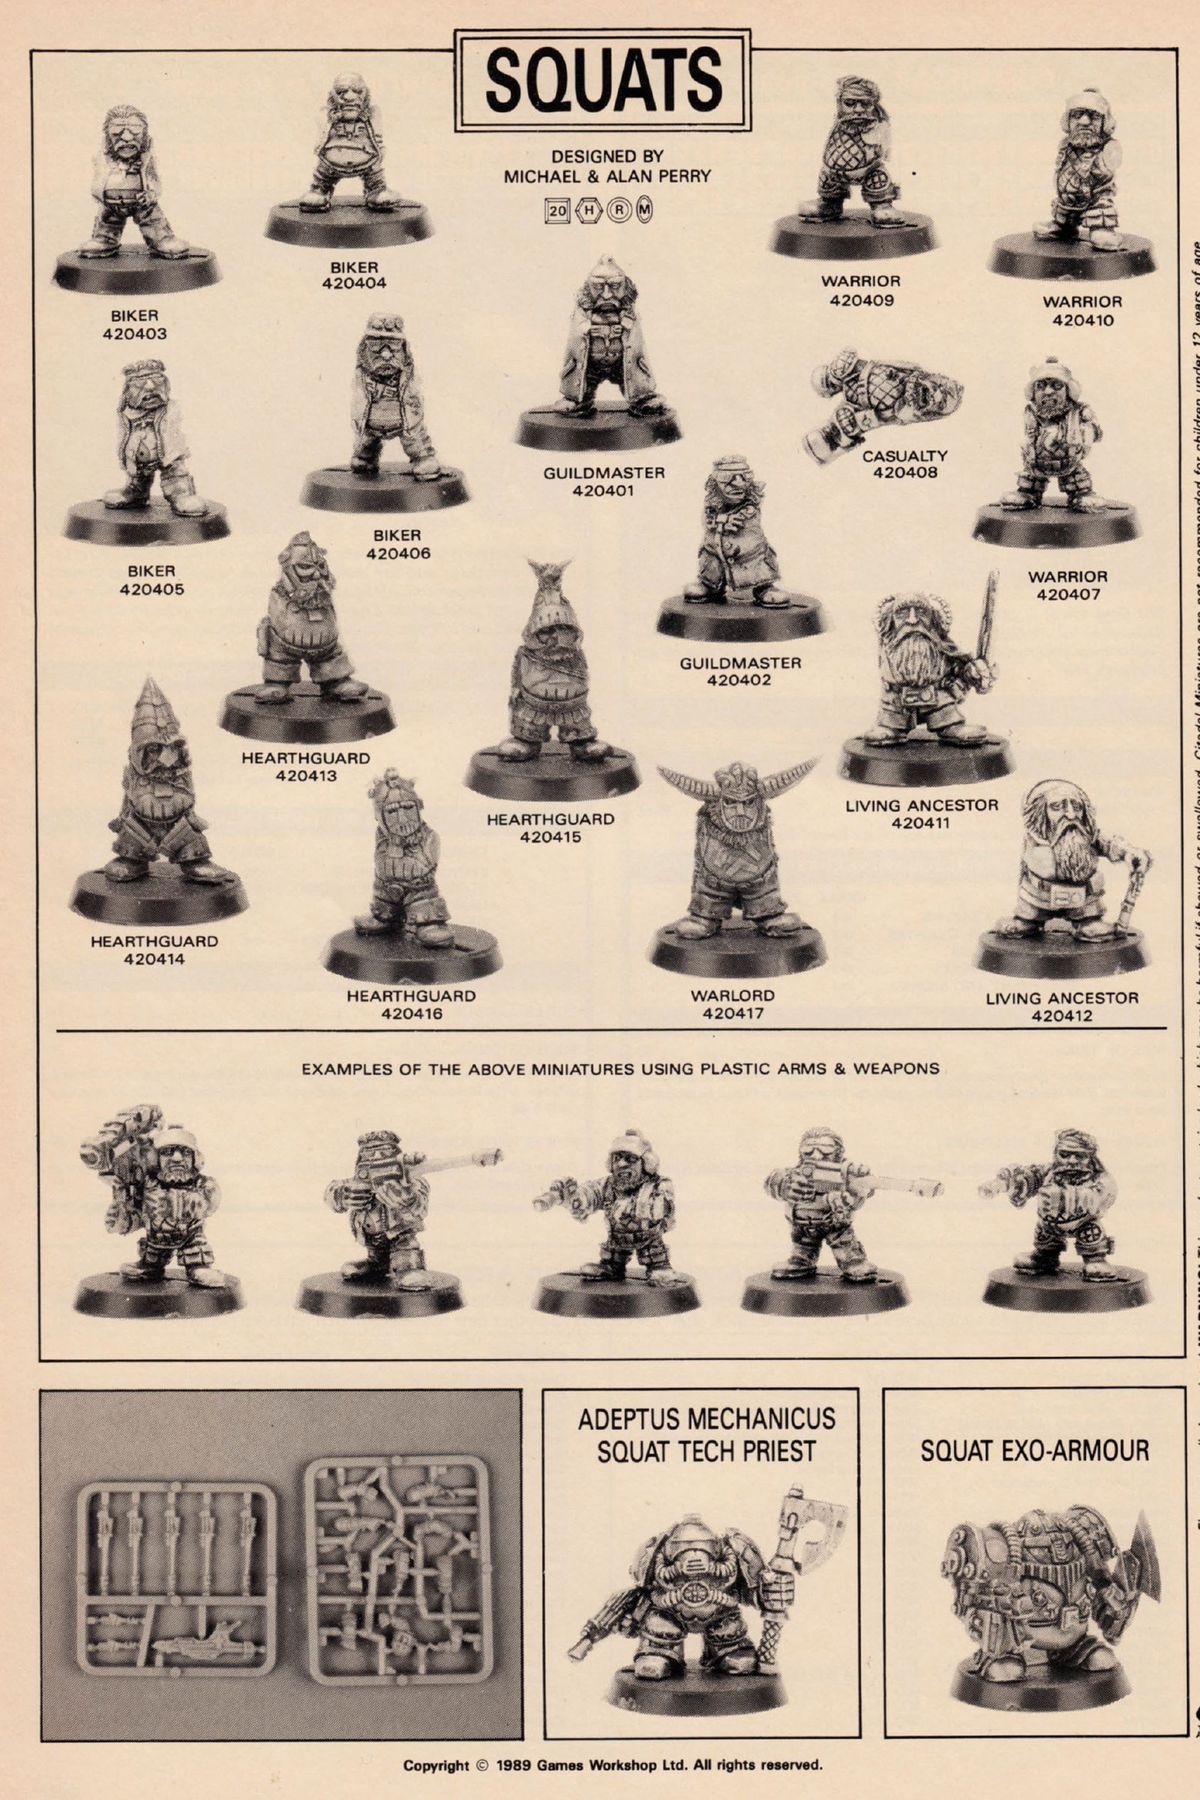 A page from White Dwarf 111 showing Squat models for order.